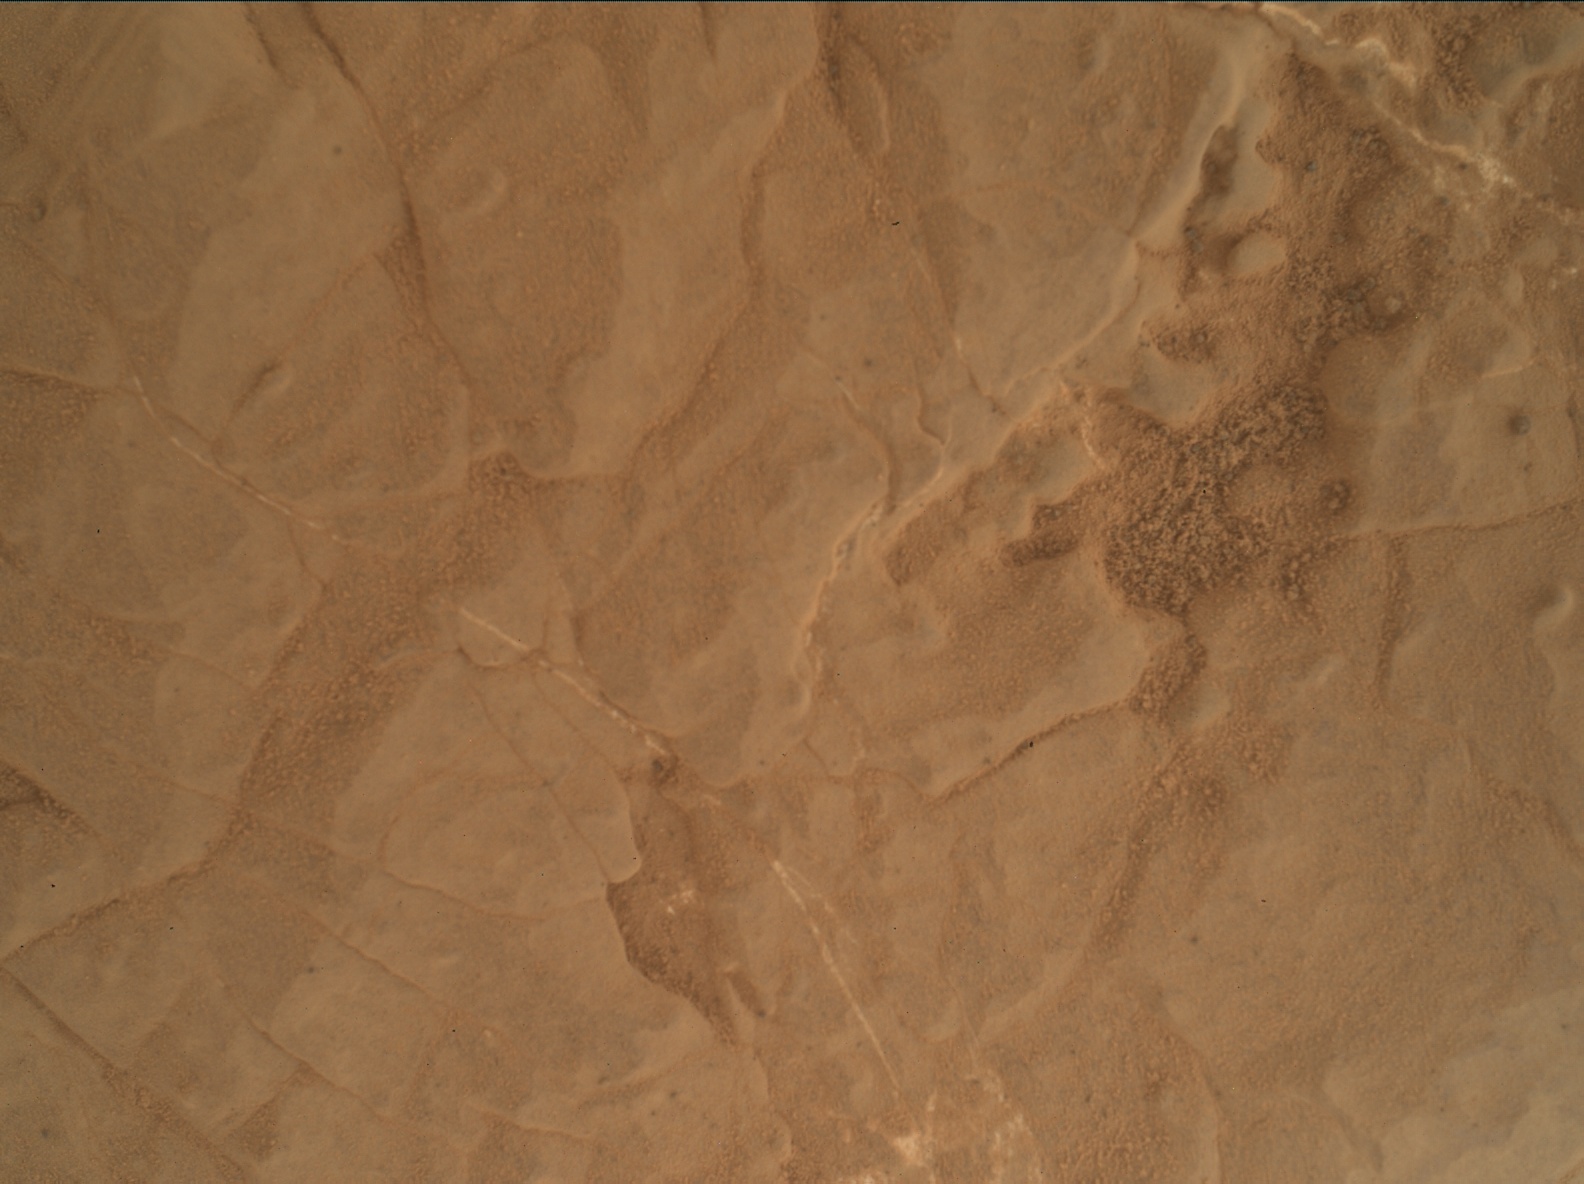 Nasa's Mars rover Curiosity acquired this image using its Mars Hand Lens Imager (MAHLI) on Sol 3047